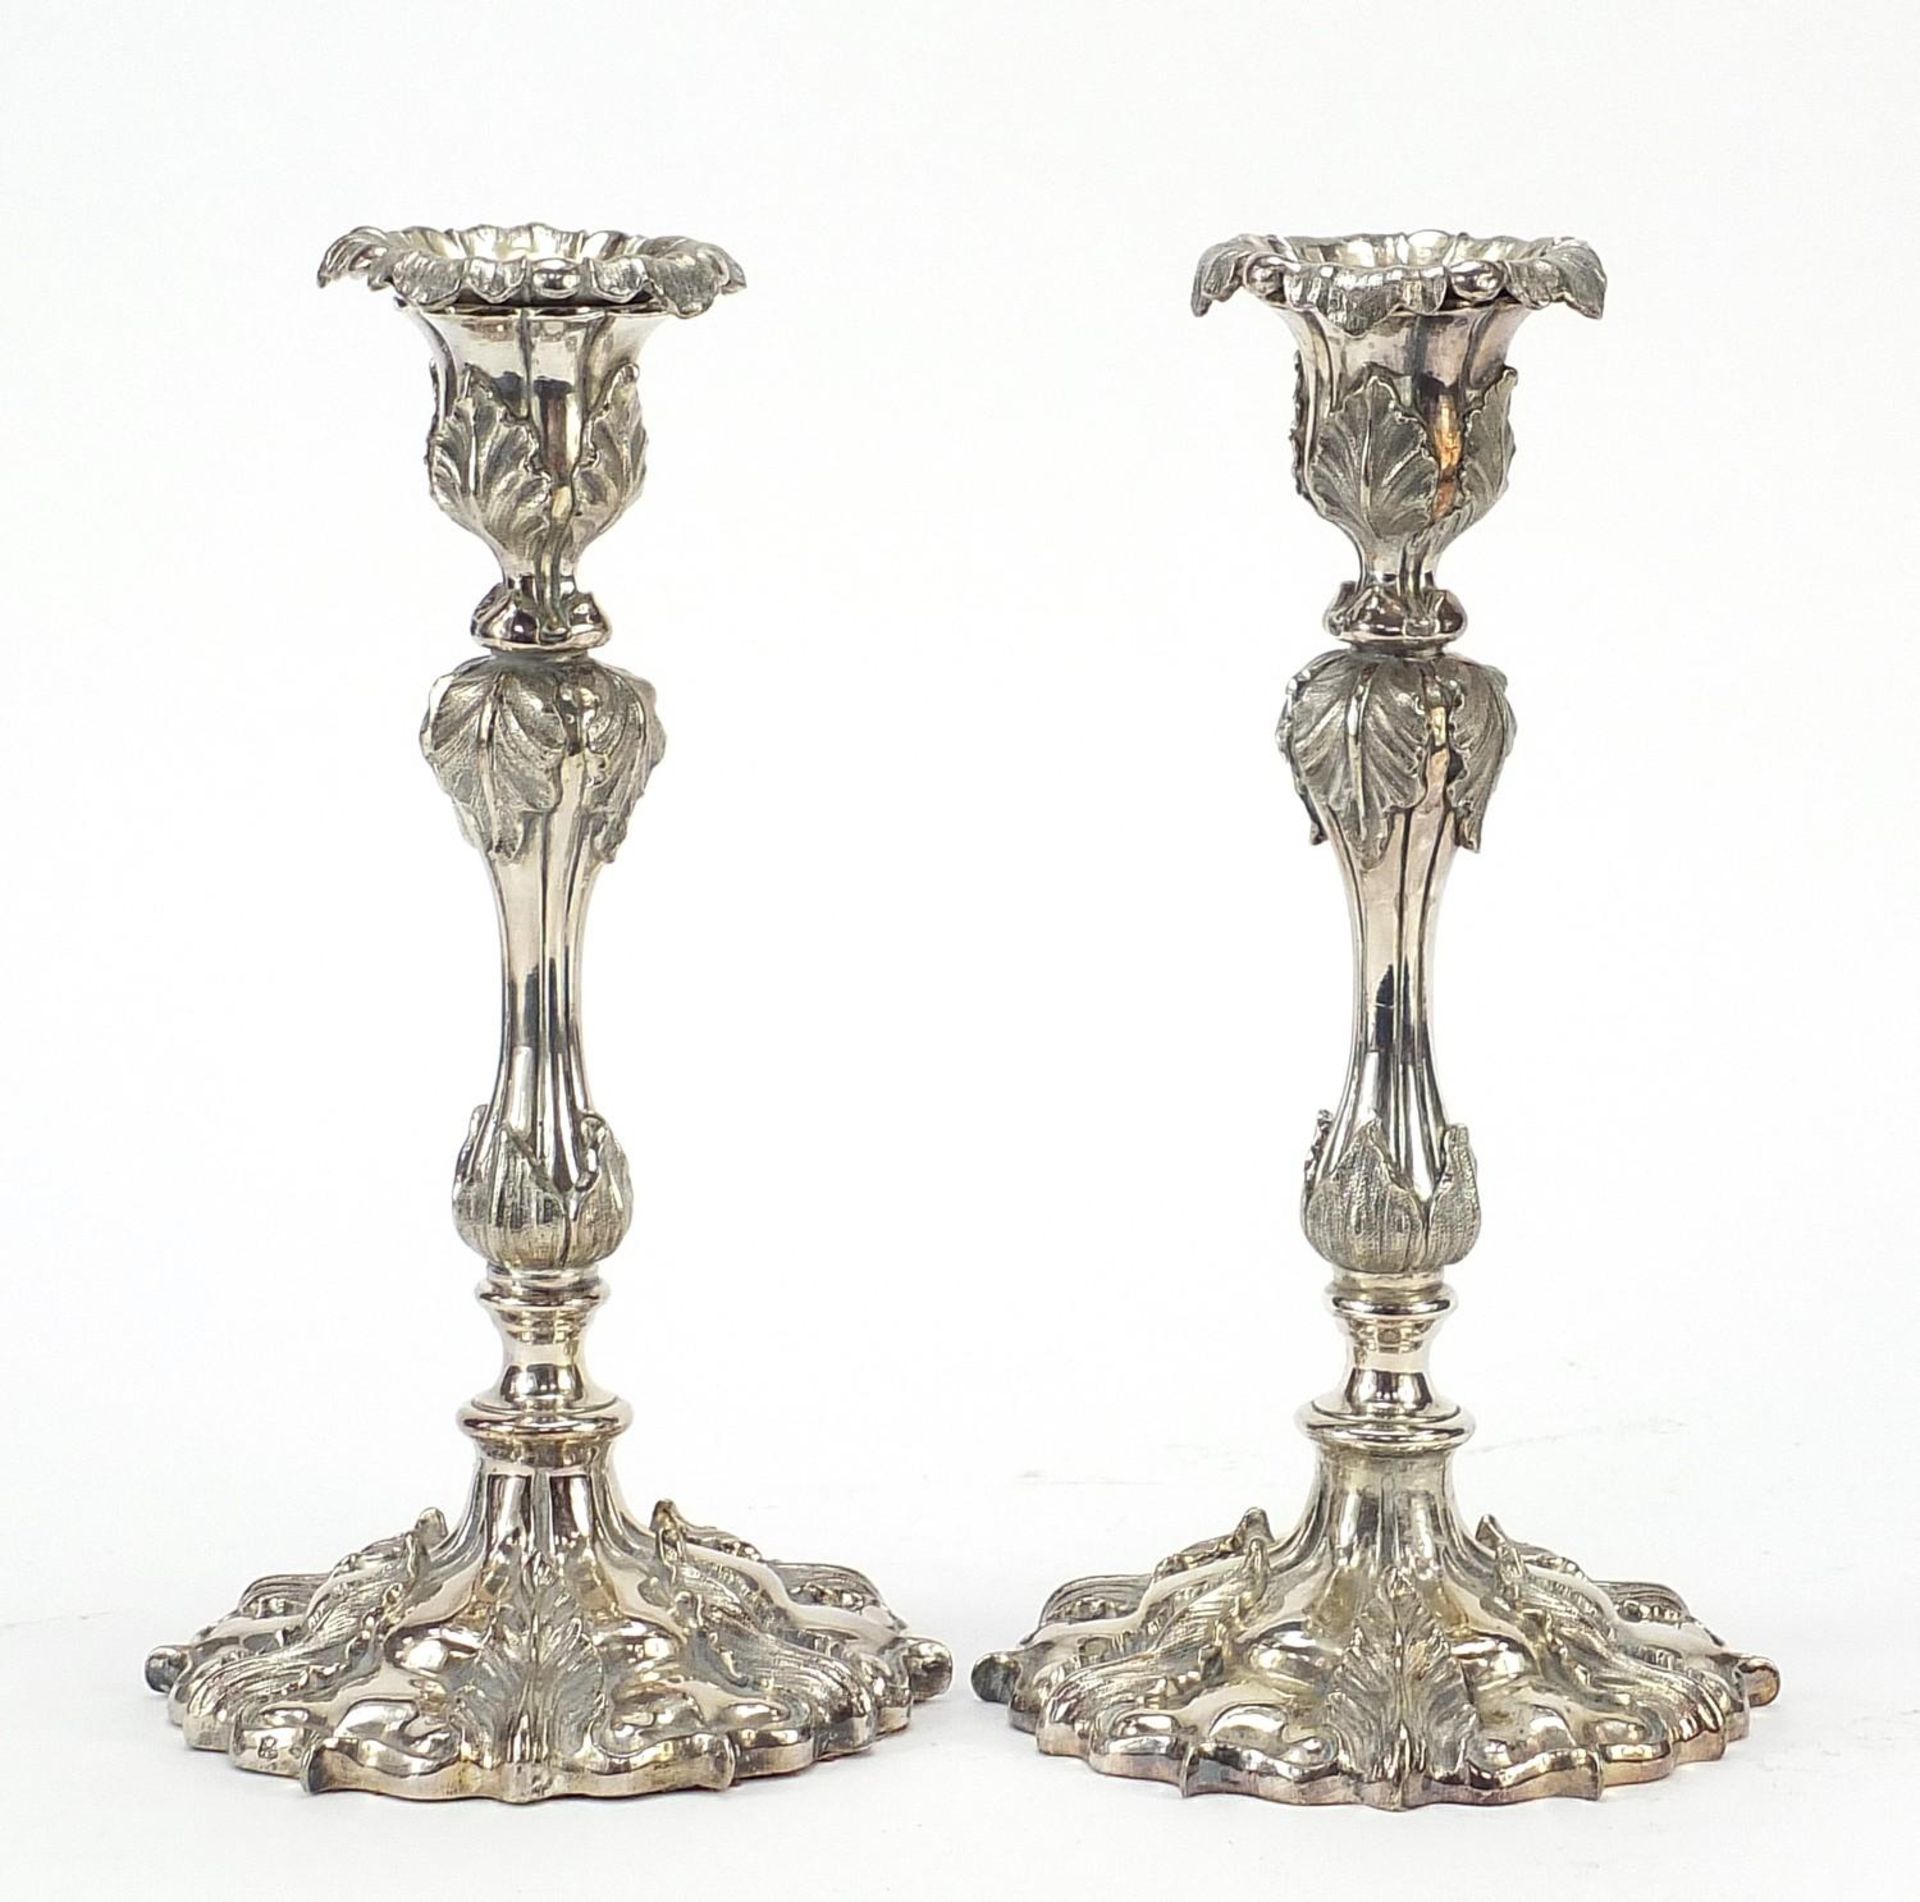 Pair of 19th century classical silver plated acanthus leaf candlesticks, each 25.5cm high